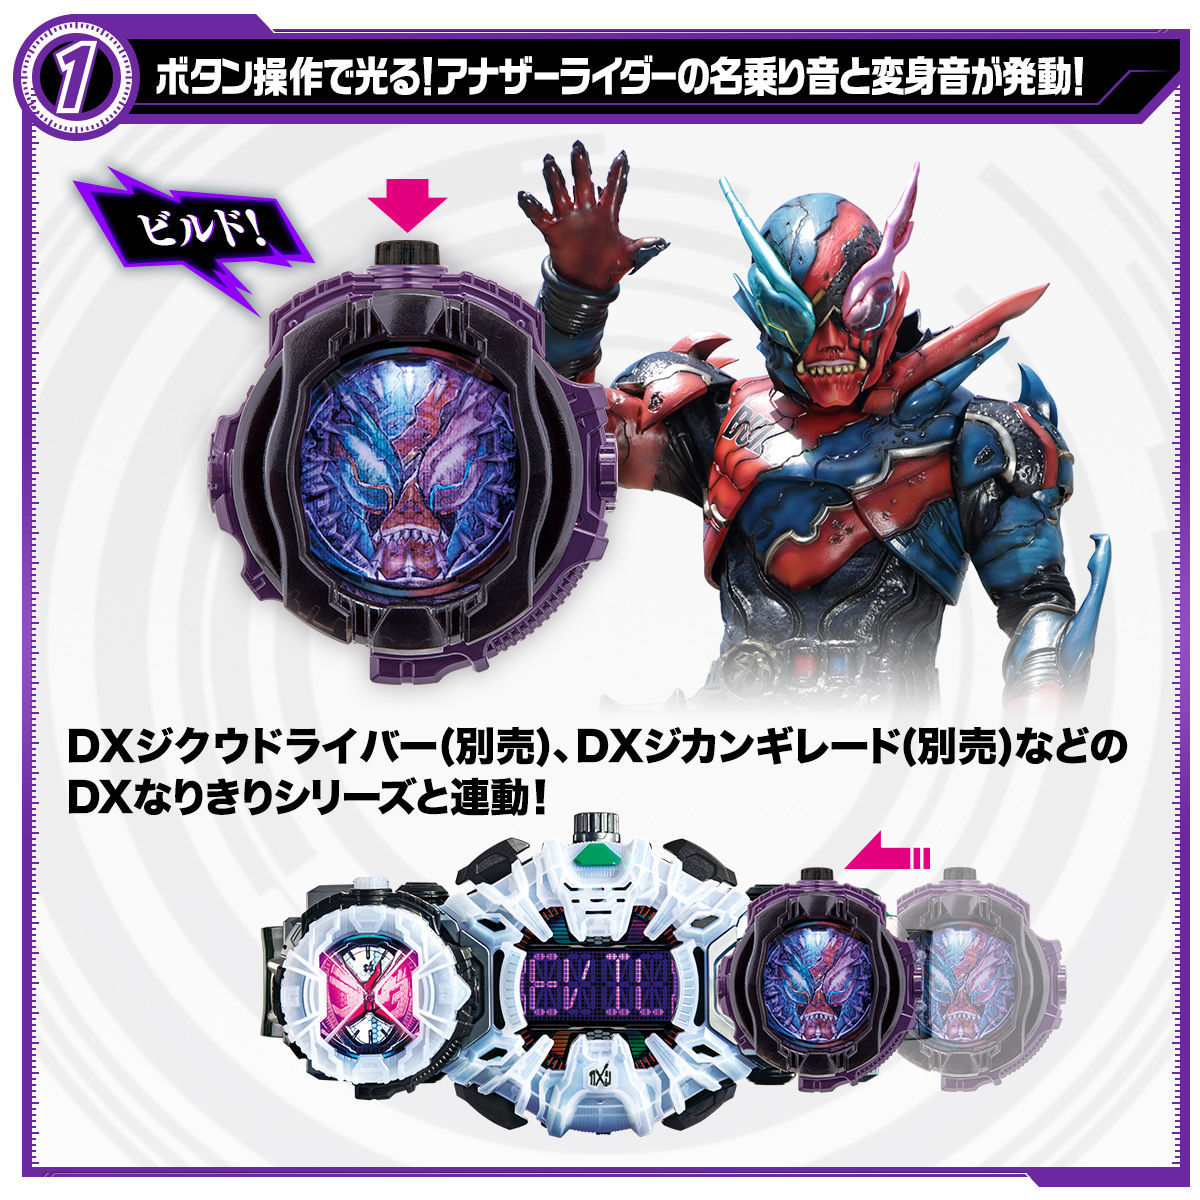 DX Another Watch Set